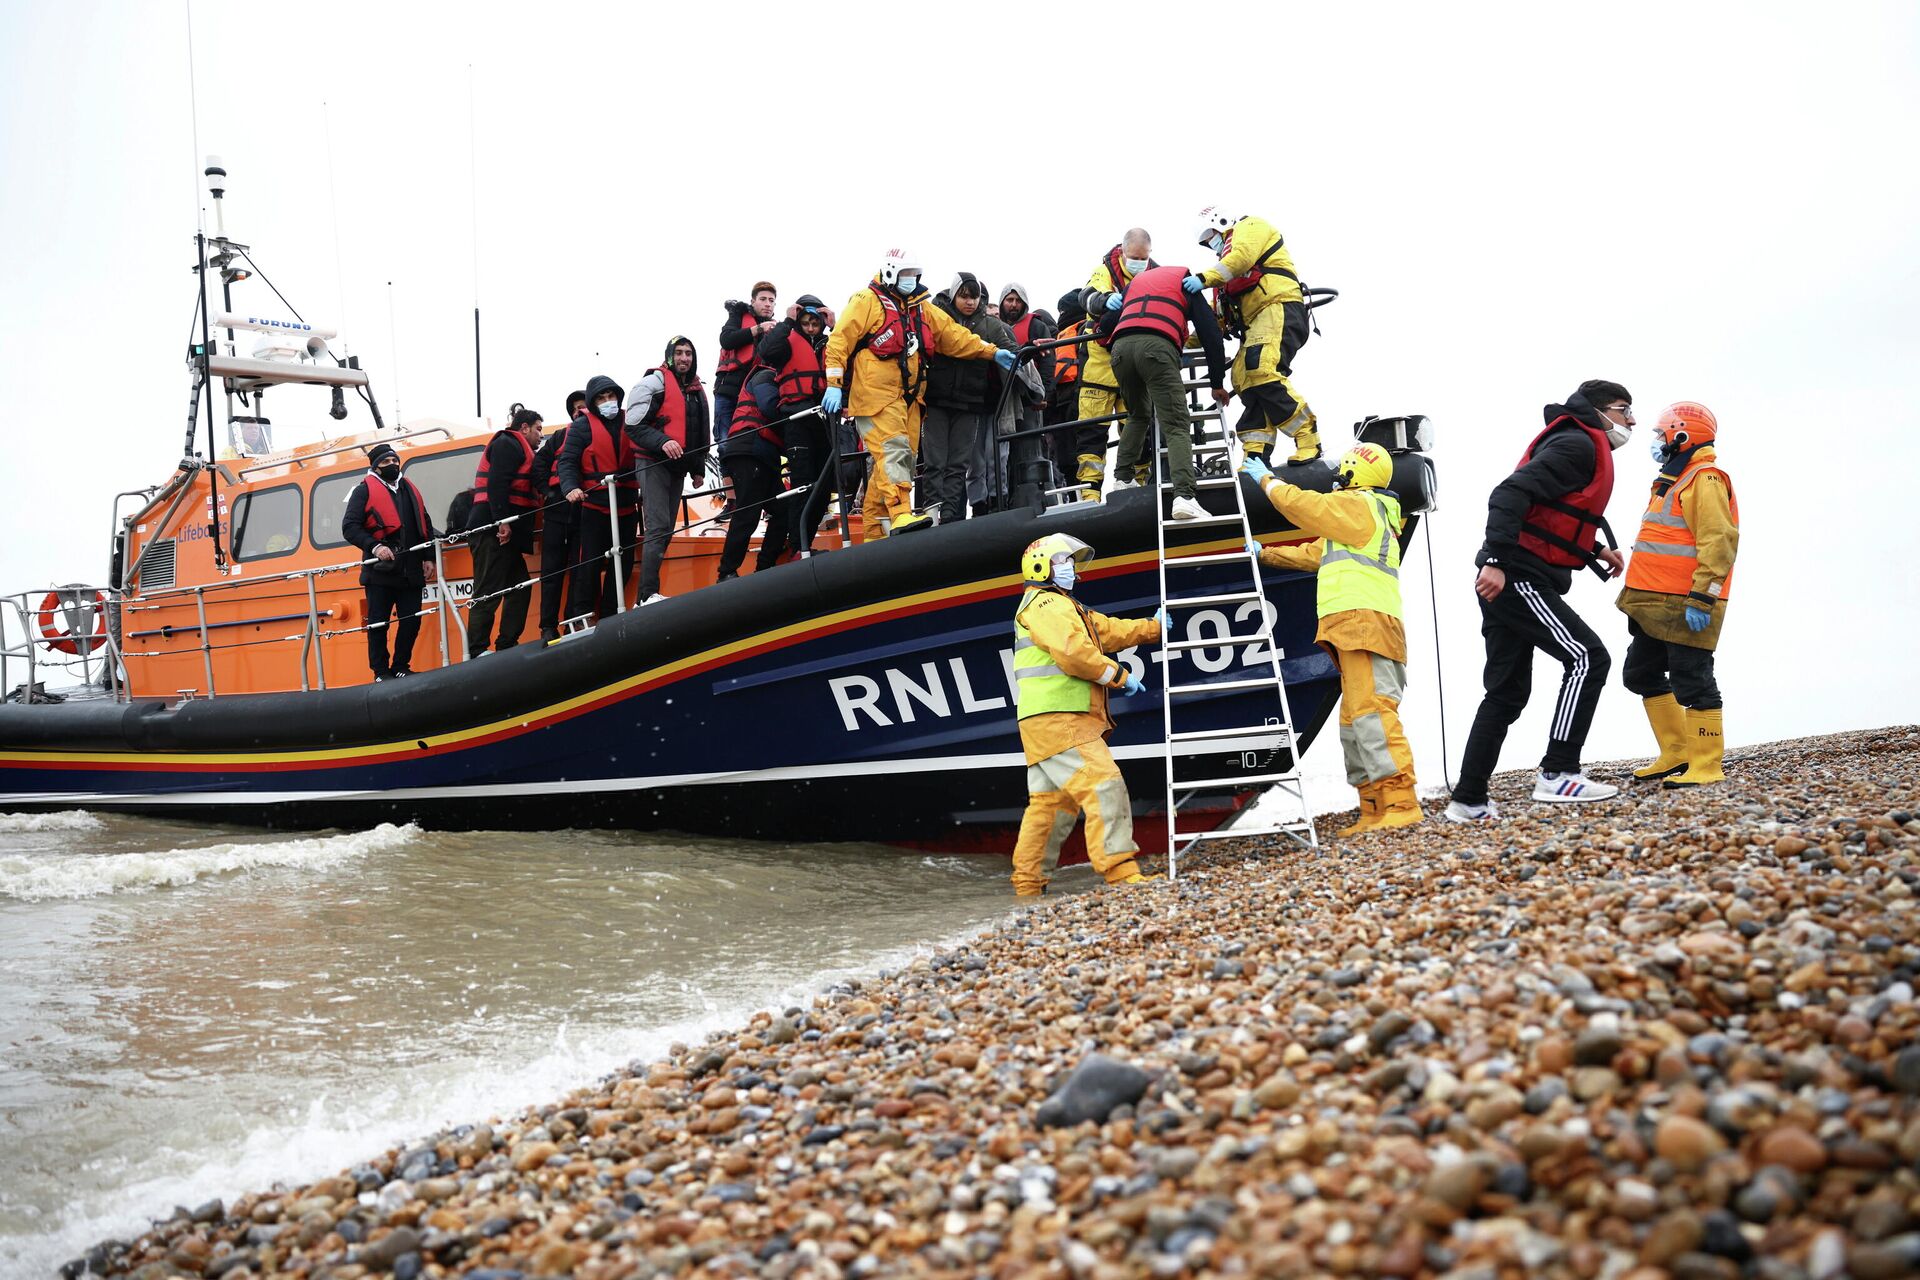 Migrants are brought ashore onboard a RNLI Lifeboat, after having crossed the channel, in Dungeness, Britain, November 24, 2021 - Sputnik International, 1920, 03.12.2021